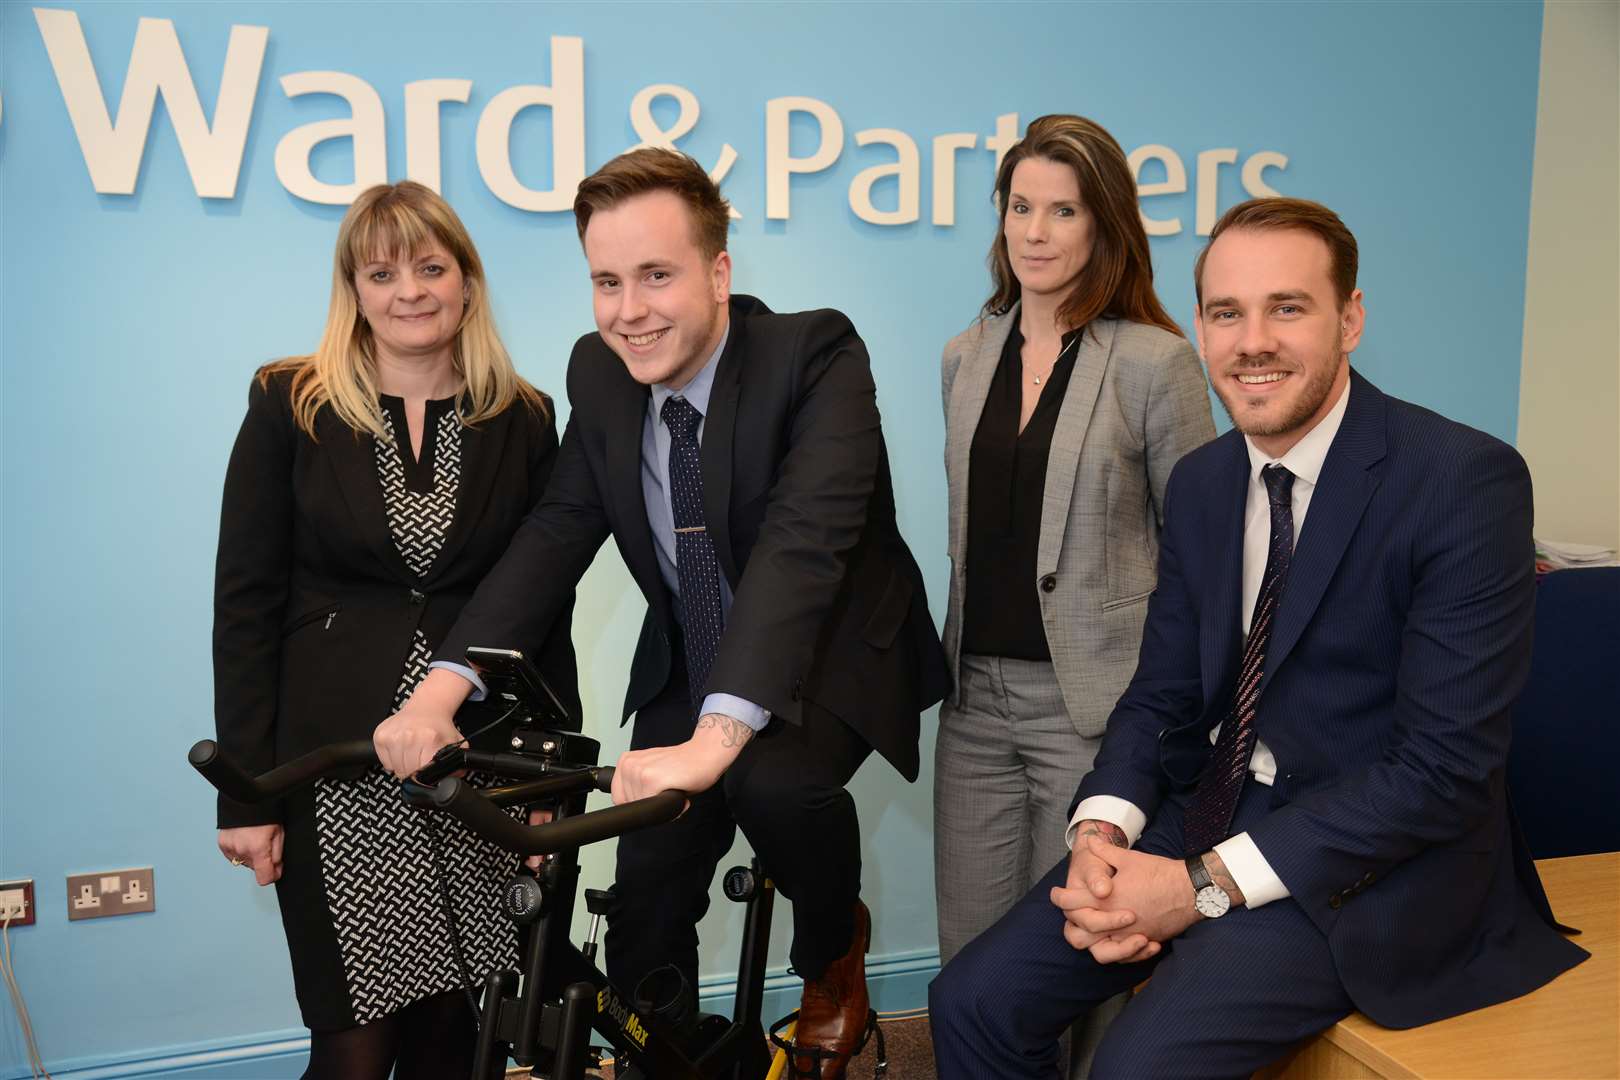 Amanda Robinson, Matt Amos, Nickie Phillipson and Manager Lee Wilson Taking part in the cycle around the world fundraiser Ward & Partners, Deal